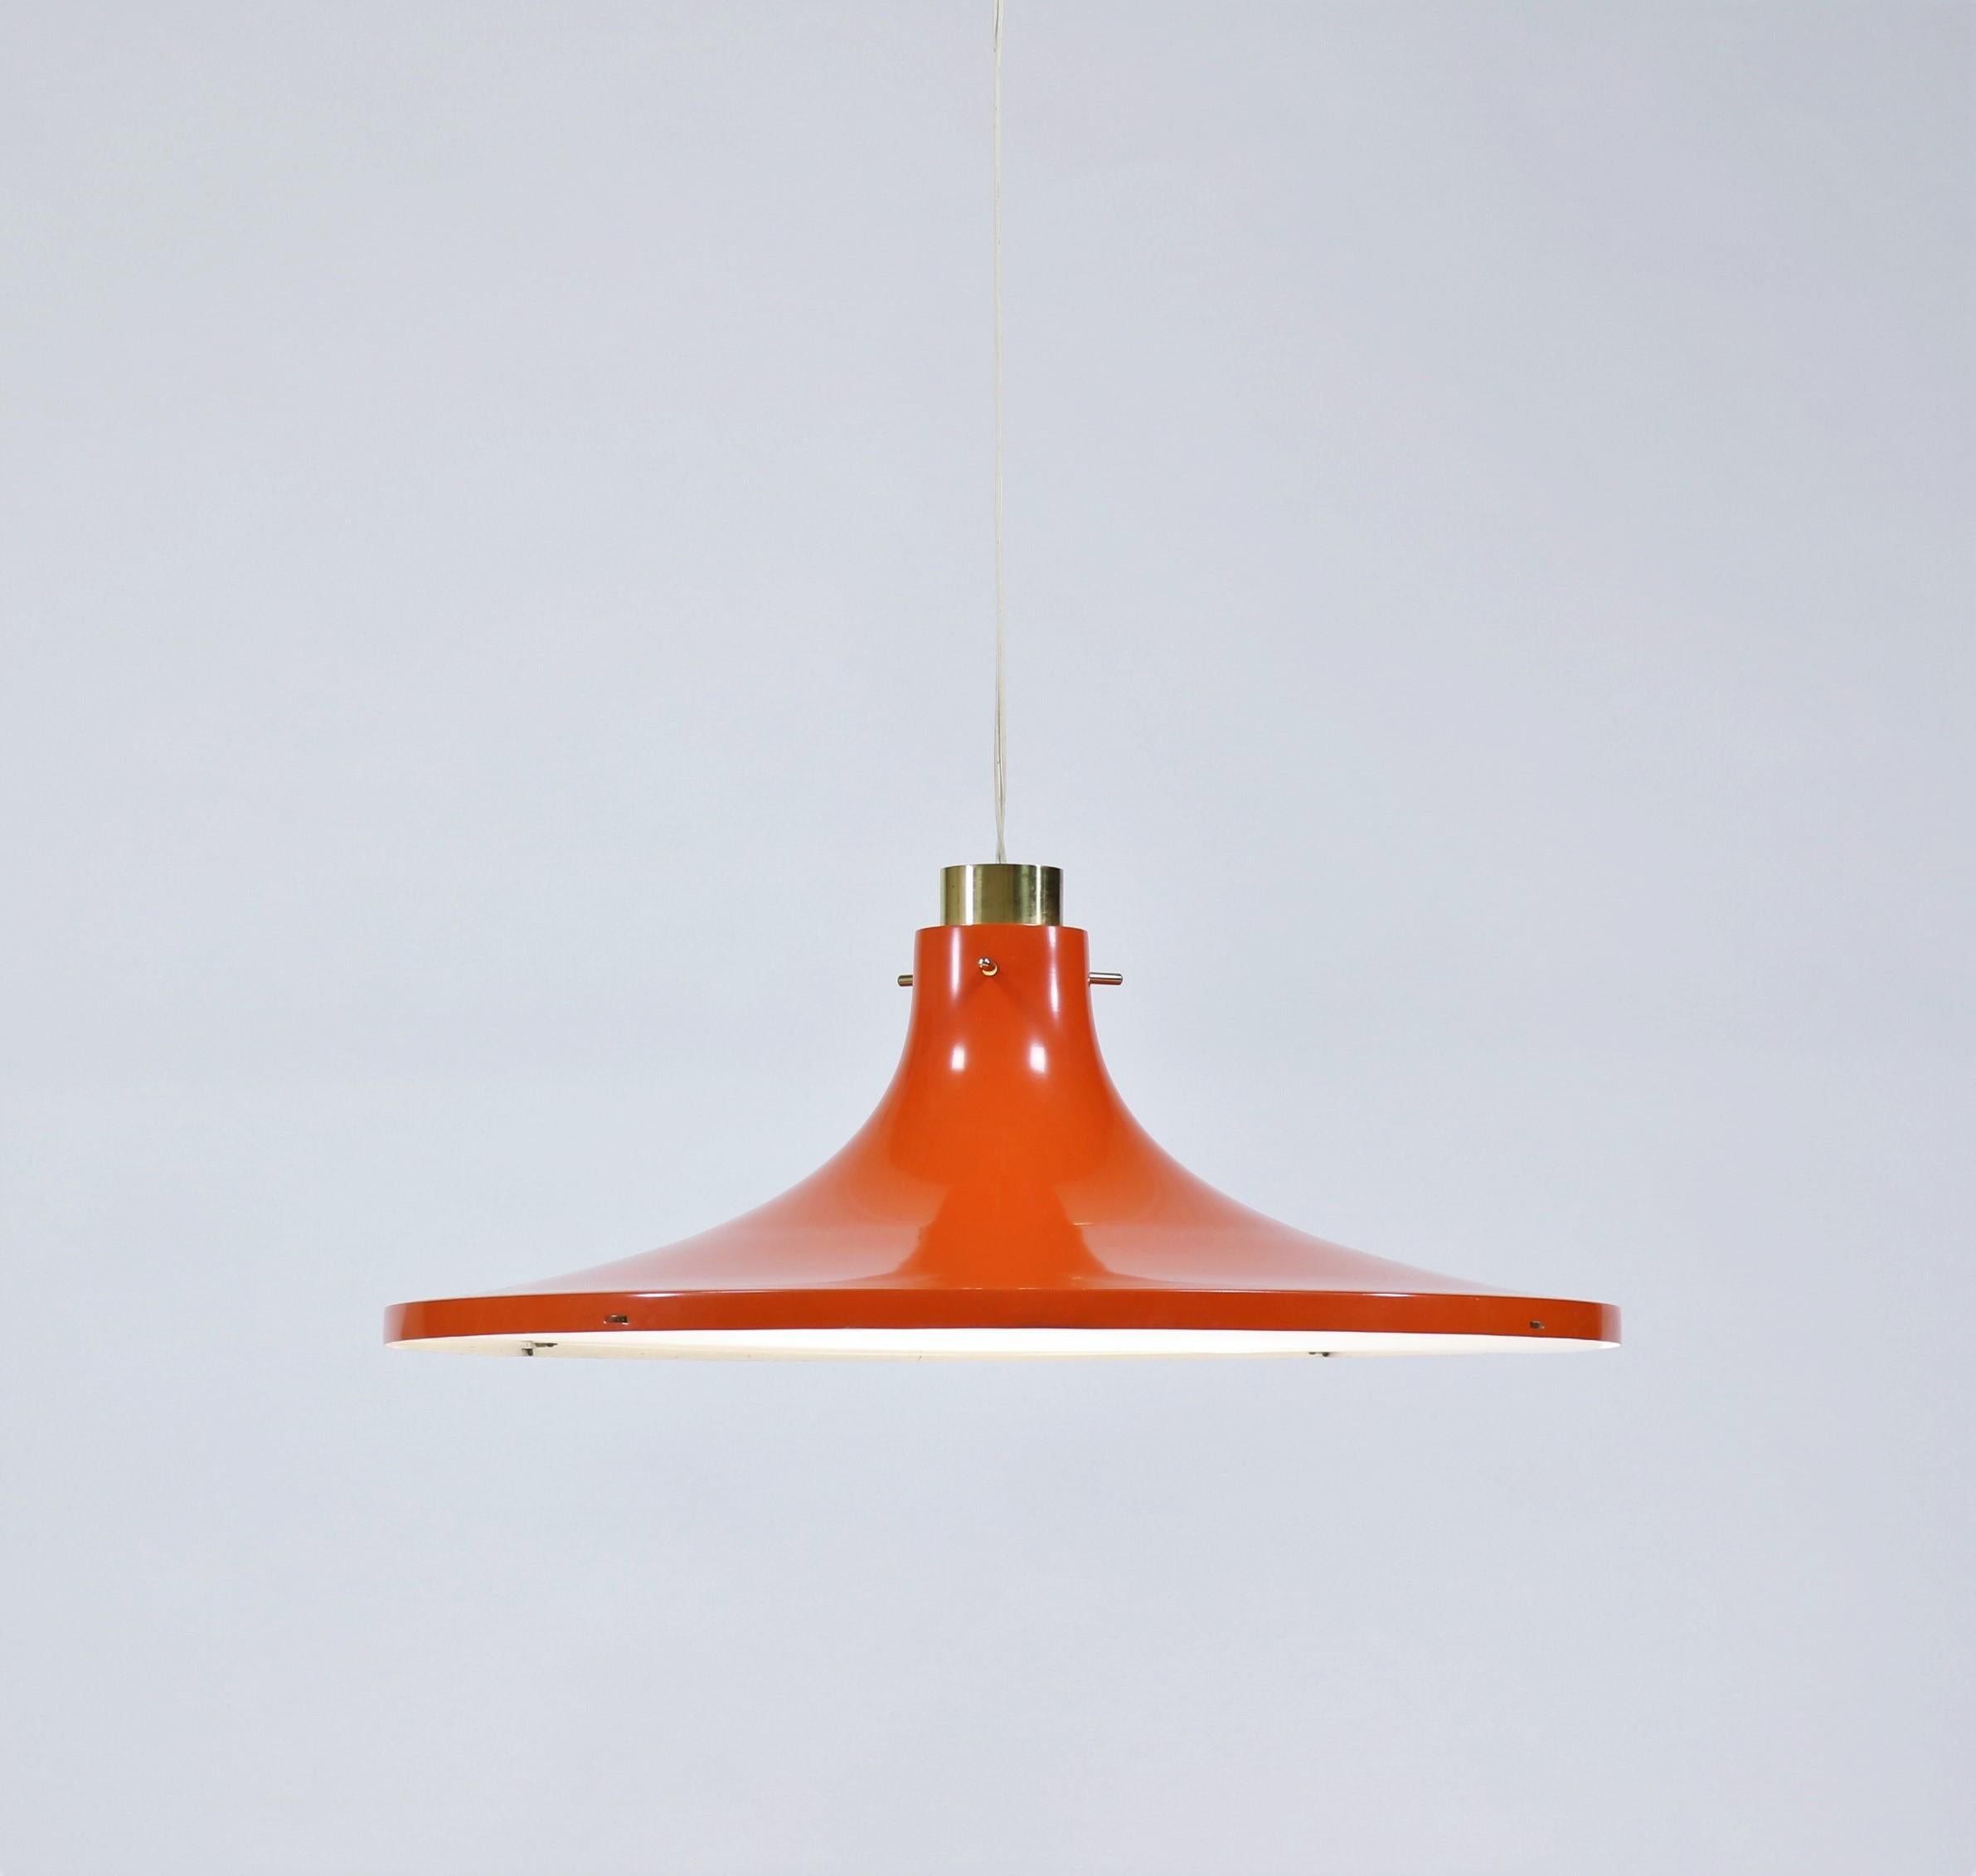 This stunning pendant was designed by Hans Agne Jakobsson in the 1960s and manufactured by Hans Agne Jakobsson AB in Markaryd, Sweden. It is made from an orange tulip formed shade with an elegant brass fixation at the top. The light comes with its